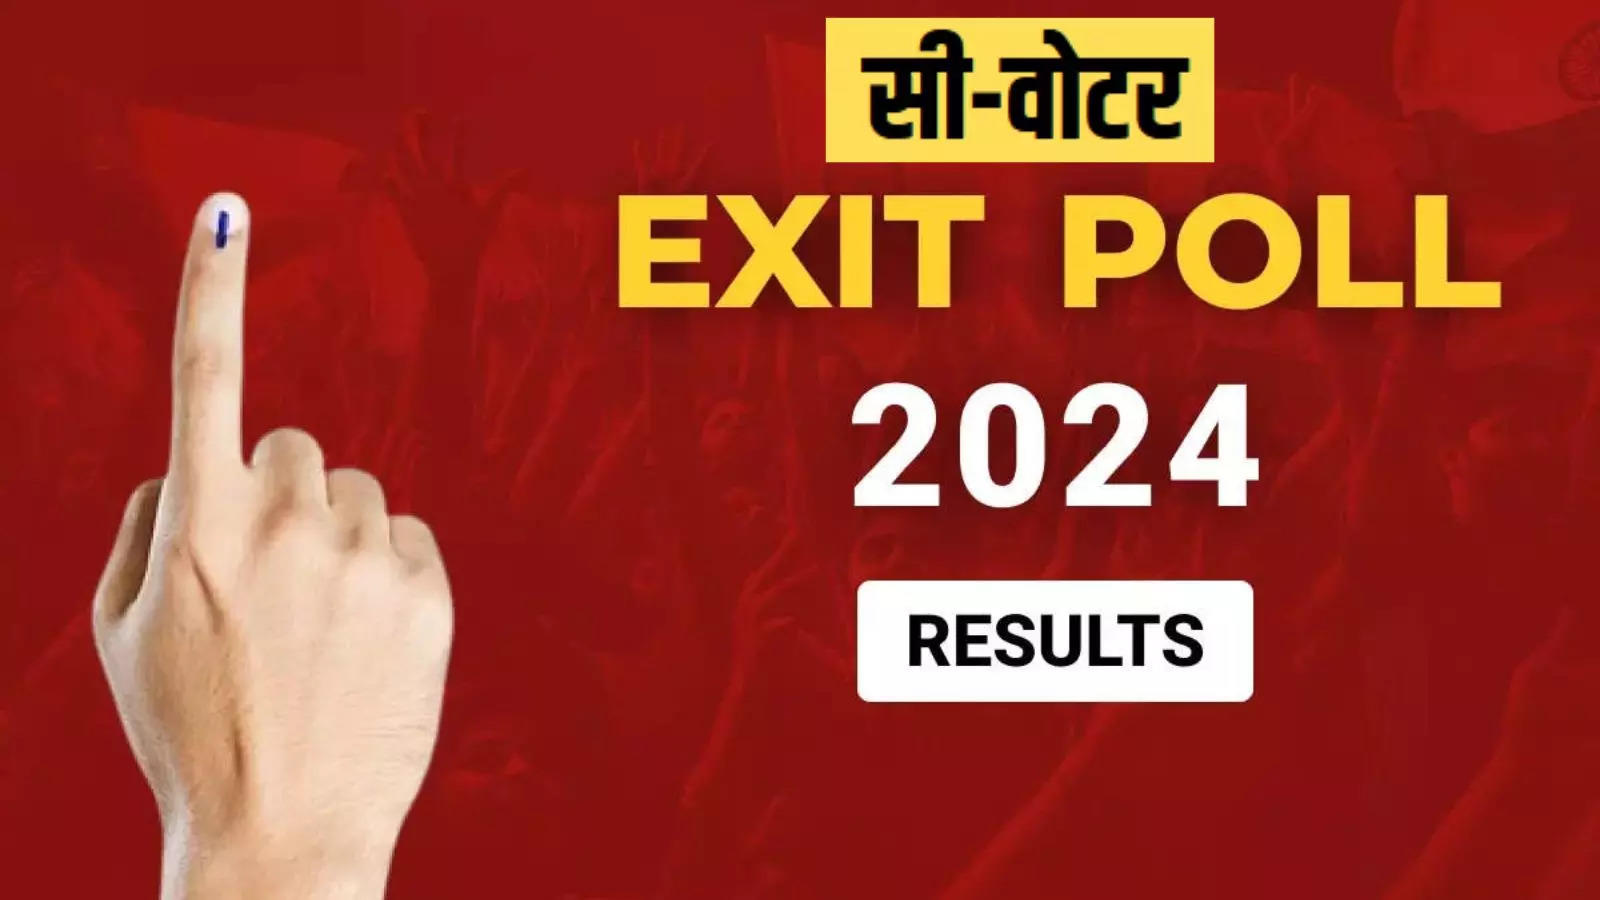 C Voter Lok Sabha Chunav Exit Poll 2024: Who will form the government in the C-Voter exit poll, it will be clear in some time